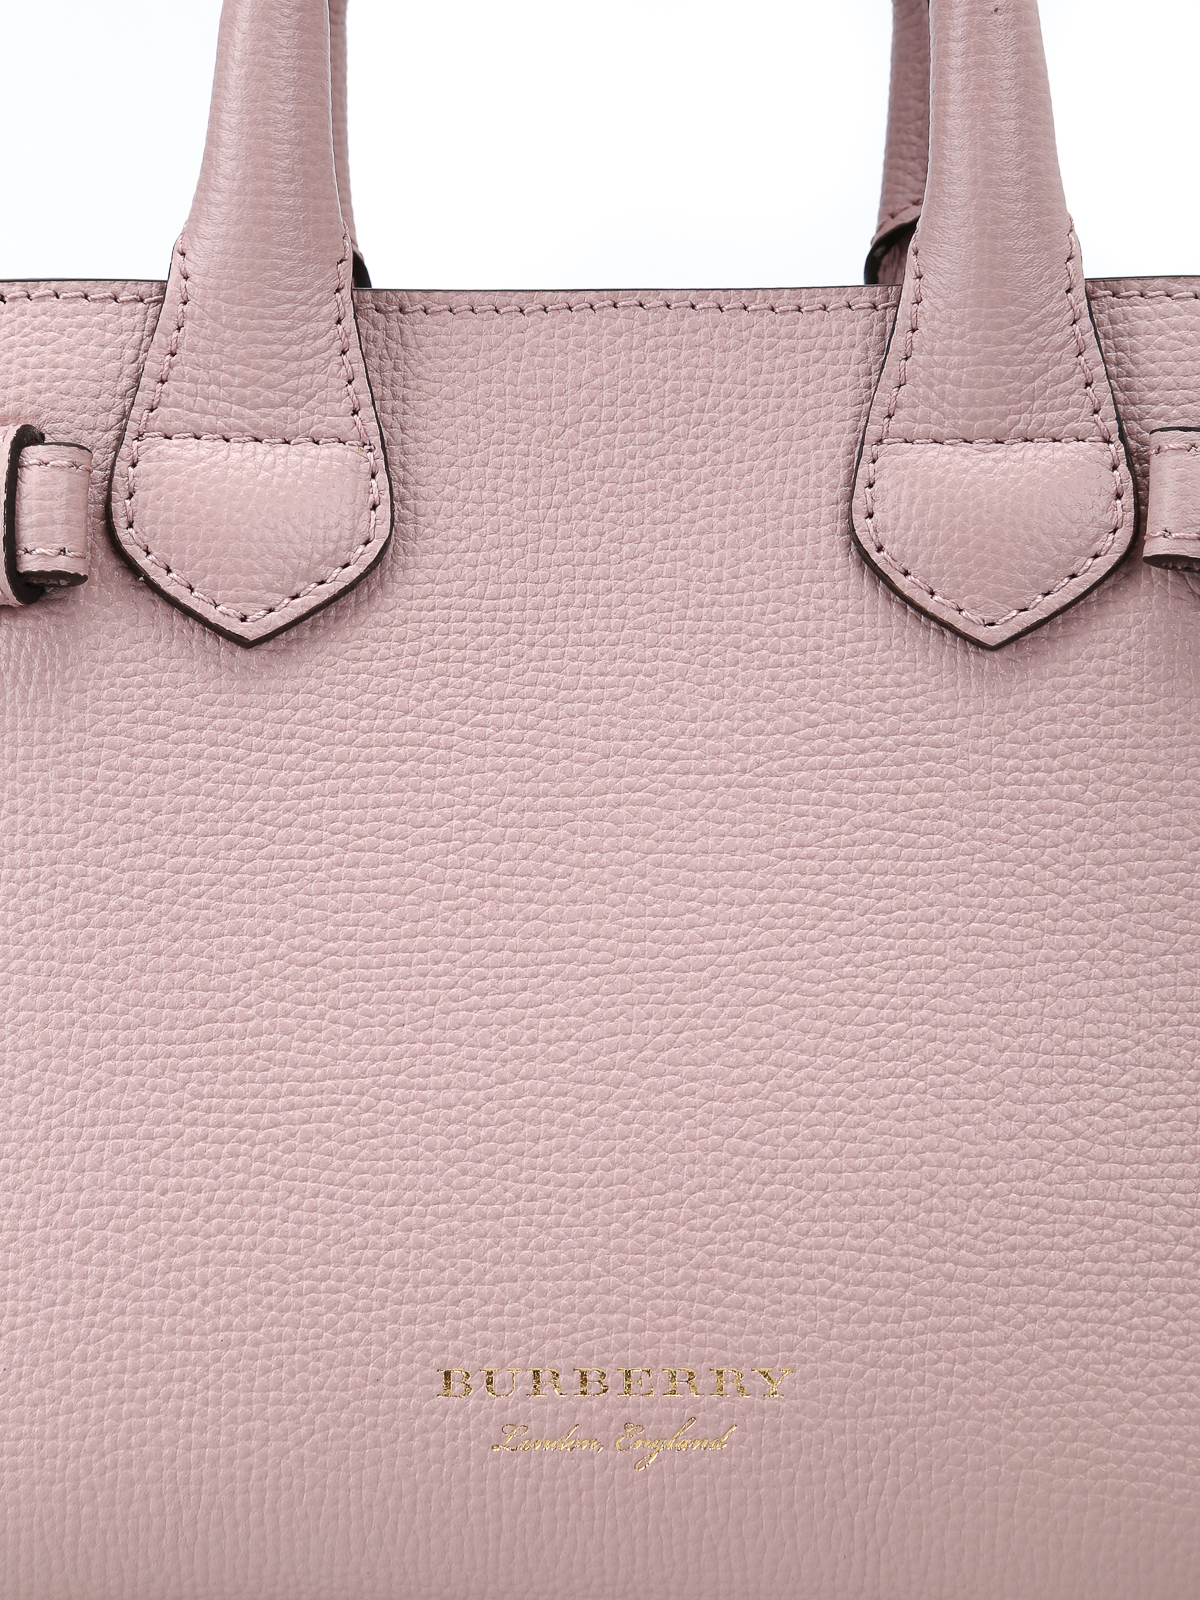 Burberry Pink Tote Bags & Handbags for Women